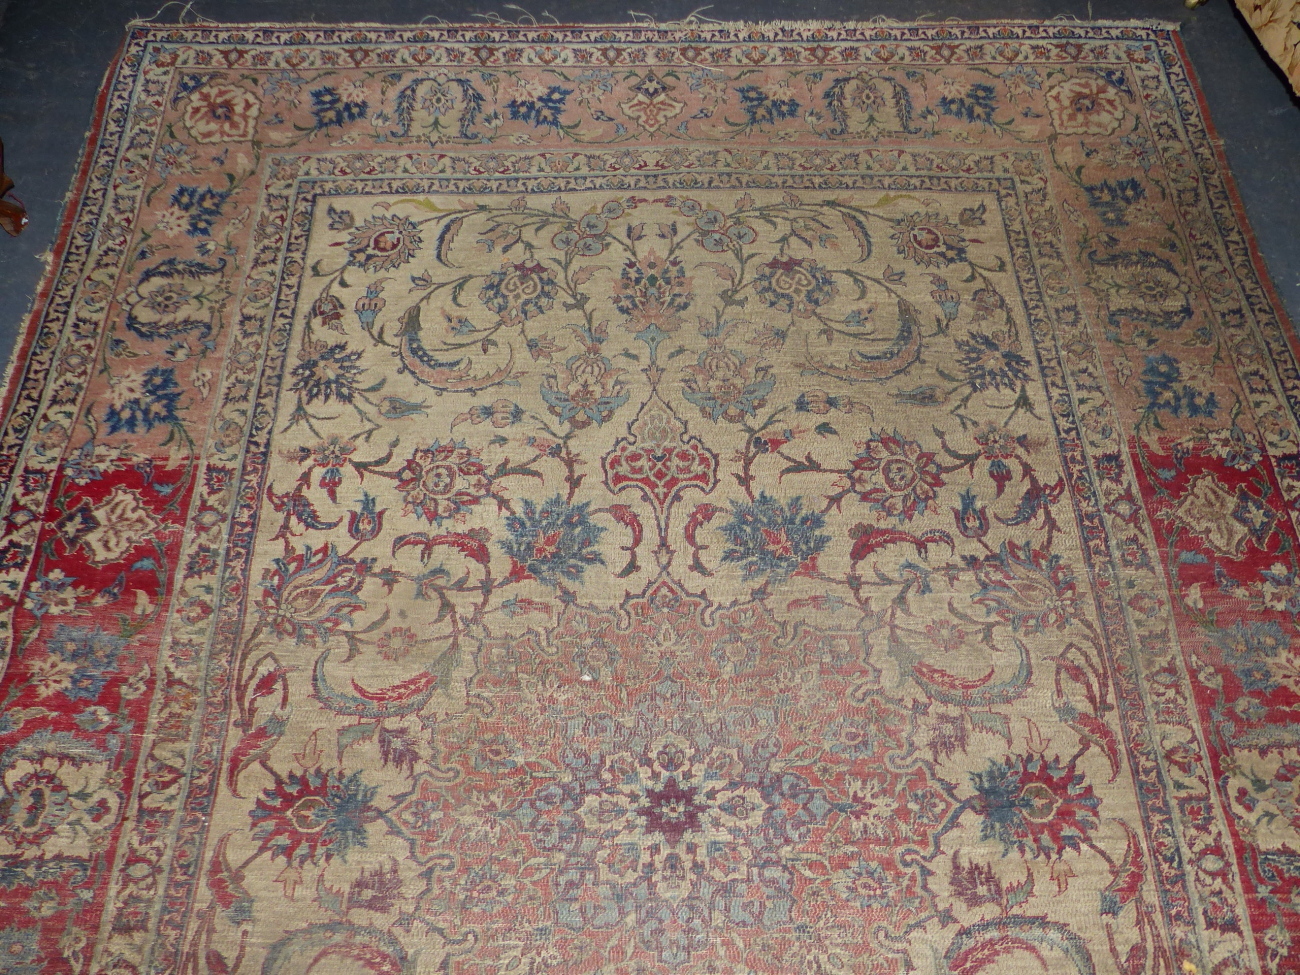 AN ANTIQUE PERSIAN ISFAHAN RUG. 207 x 145cms. - Image 3 of 7